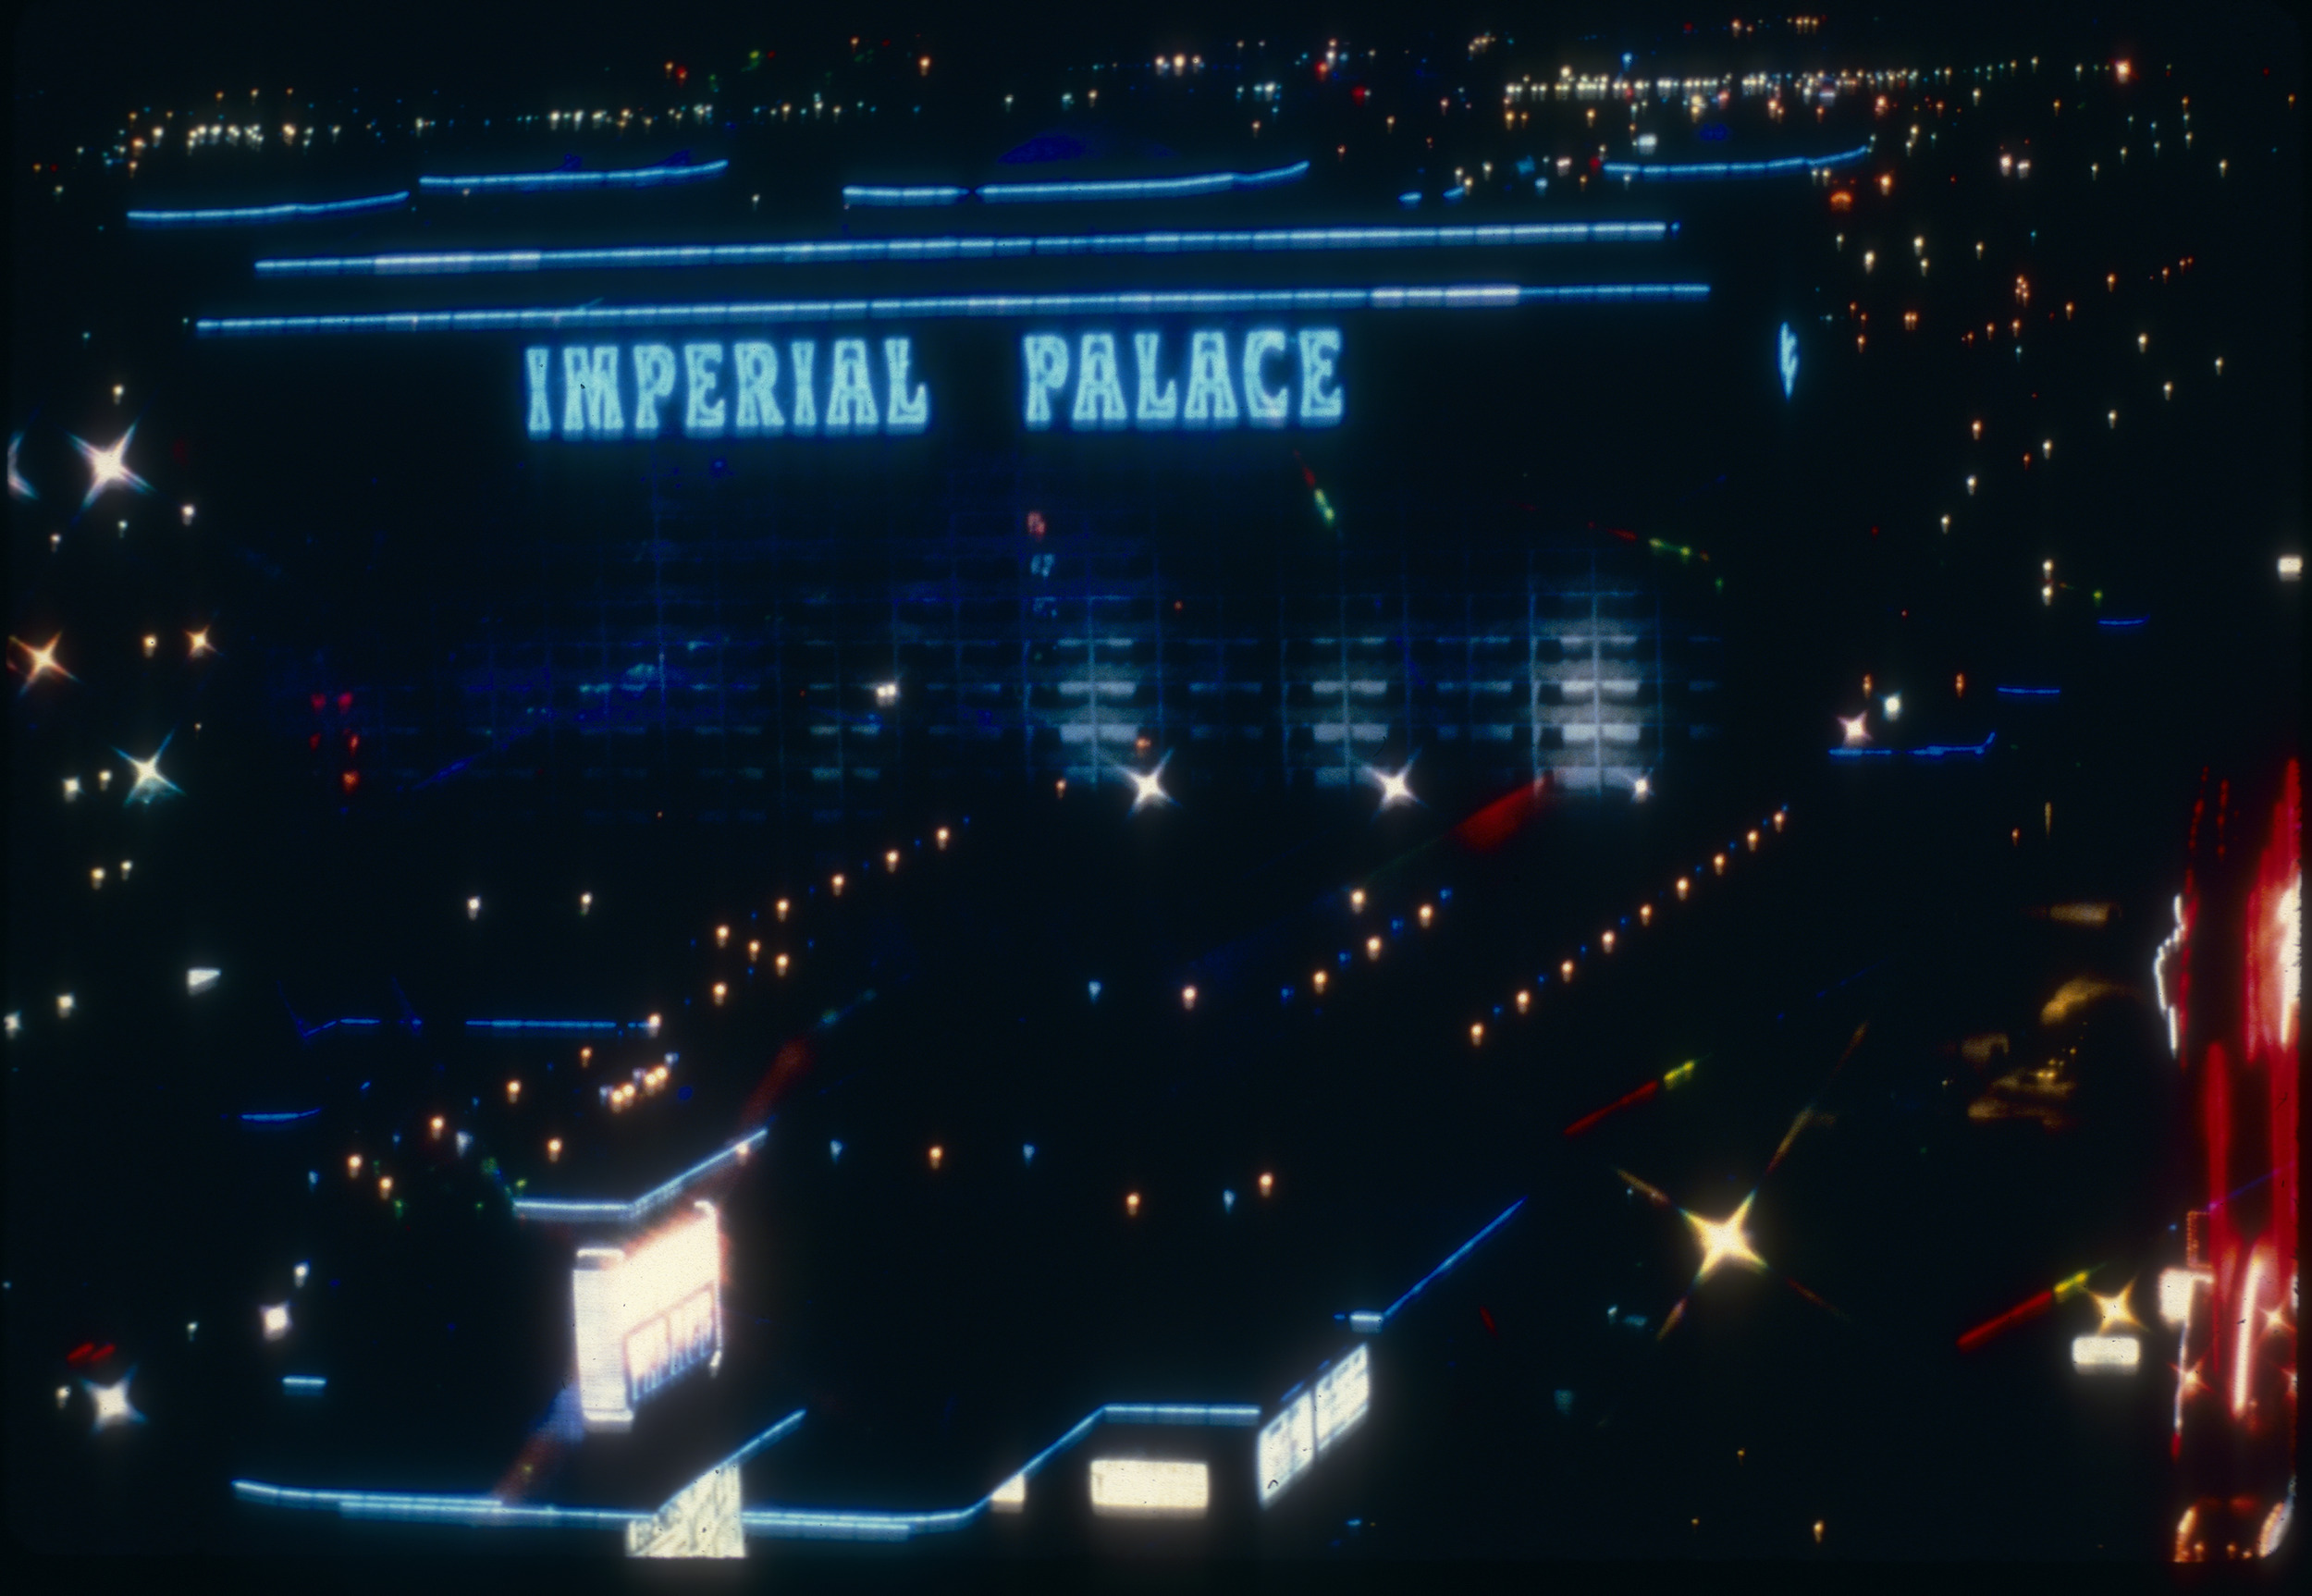 Slide transparency of the Imperial Palace, Las Vegas, 1986